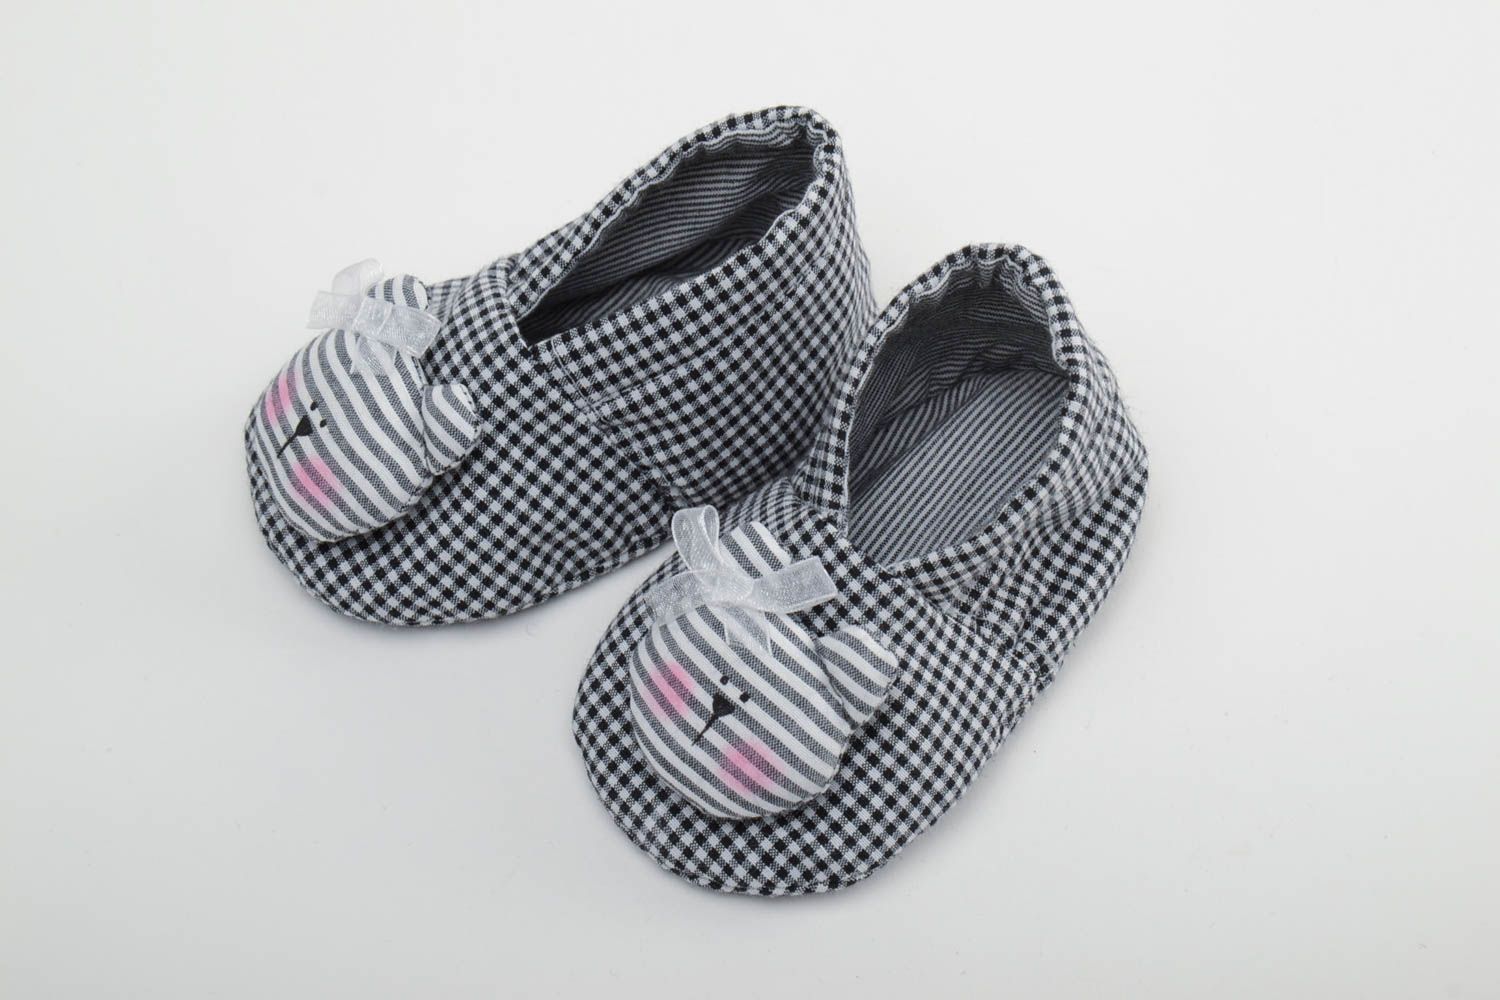 Handmade baby shoes sewn of checkered cotton fabric with metal buttons Bears photo 2